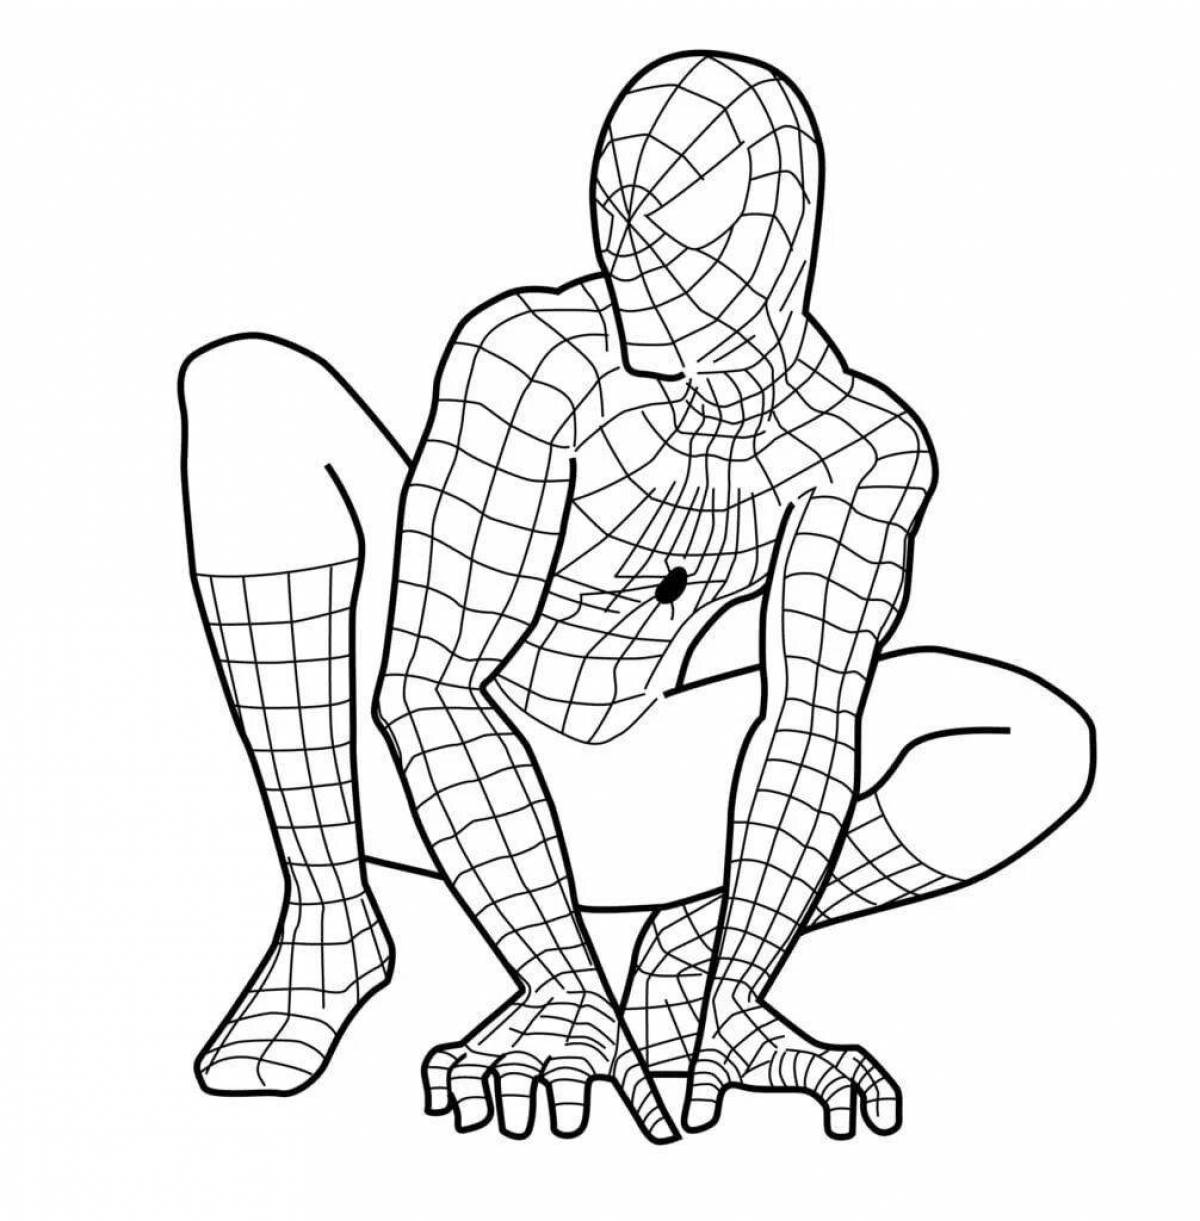 Colorful spiderman coloring page for kids